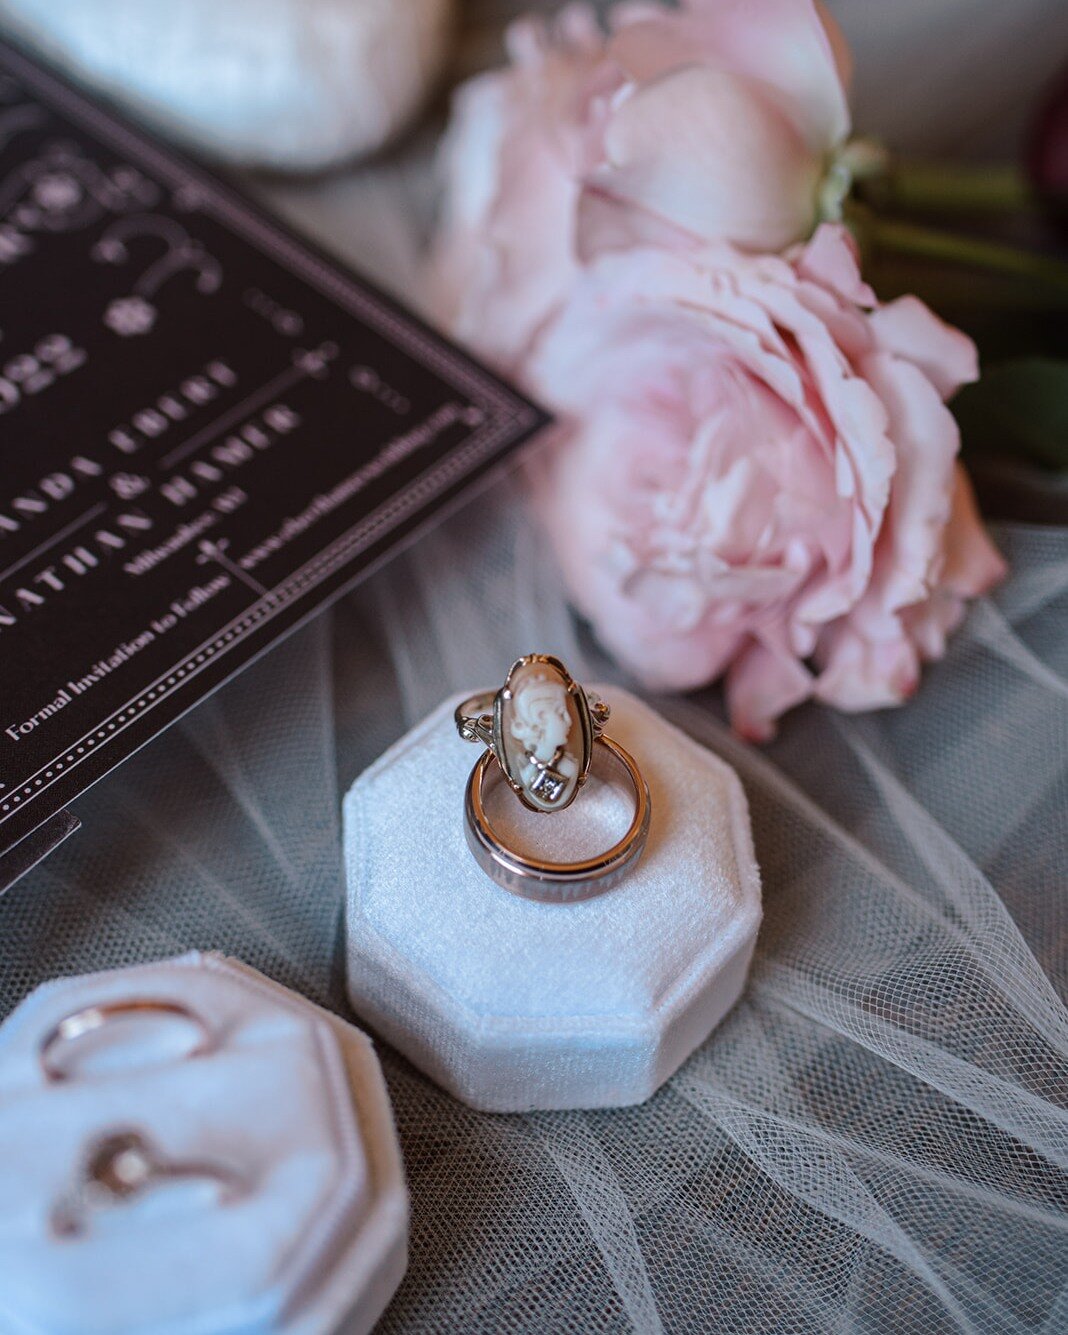 It's engagement season! What's your ring style - vintage, family heirloom, big, small, traditional, non-traditional? 

Photo by Alternative Bride Photography